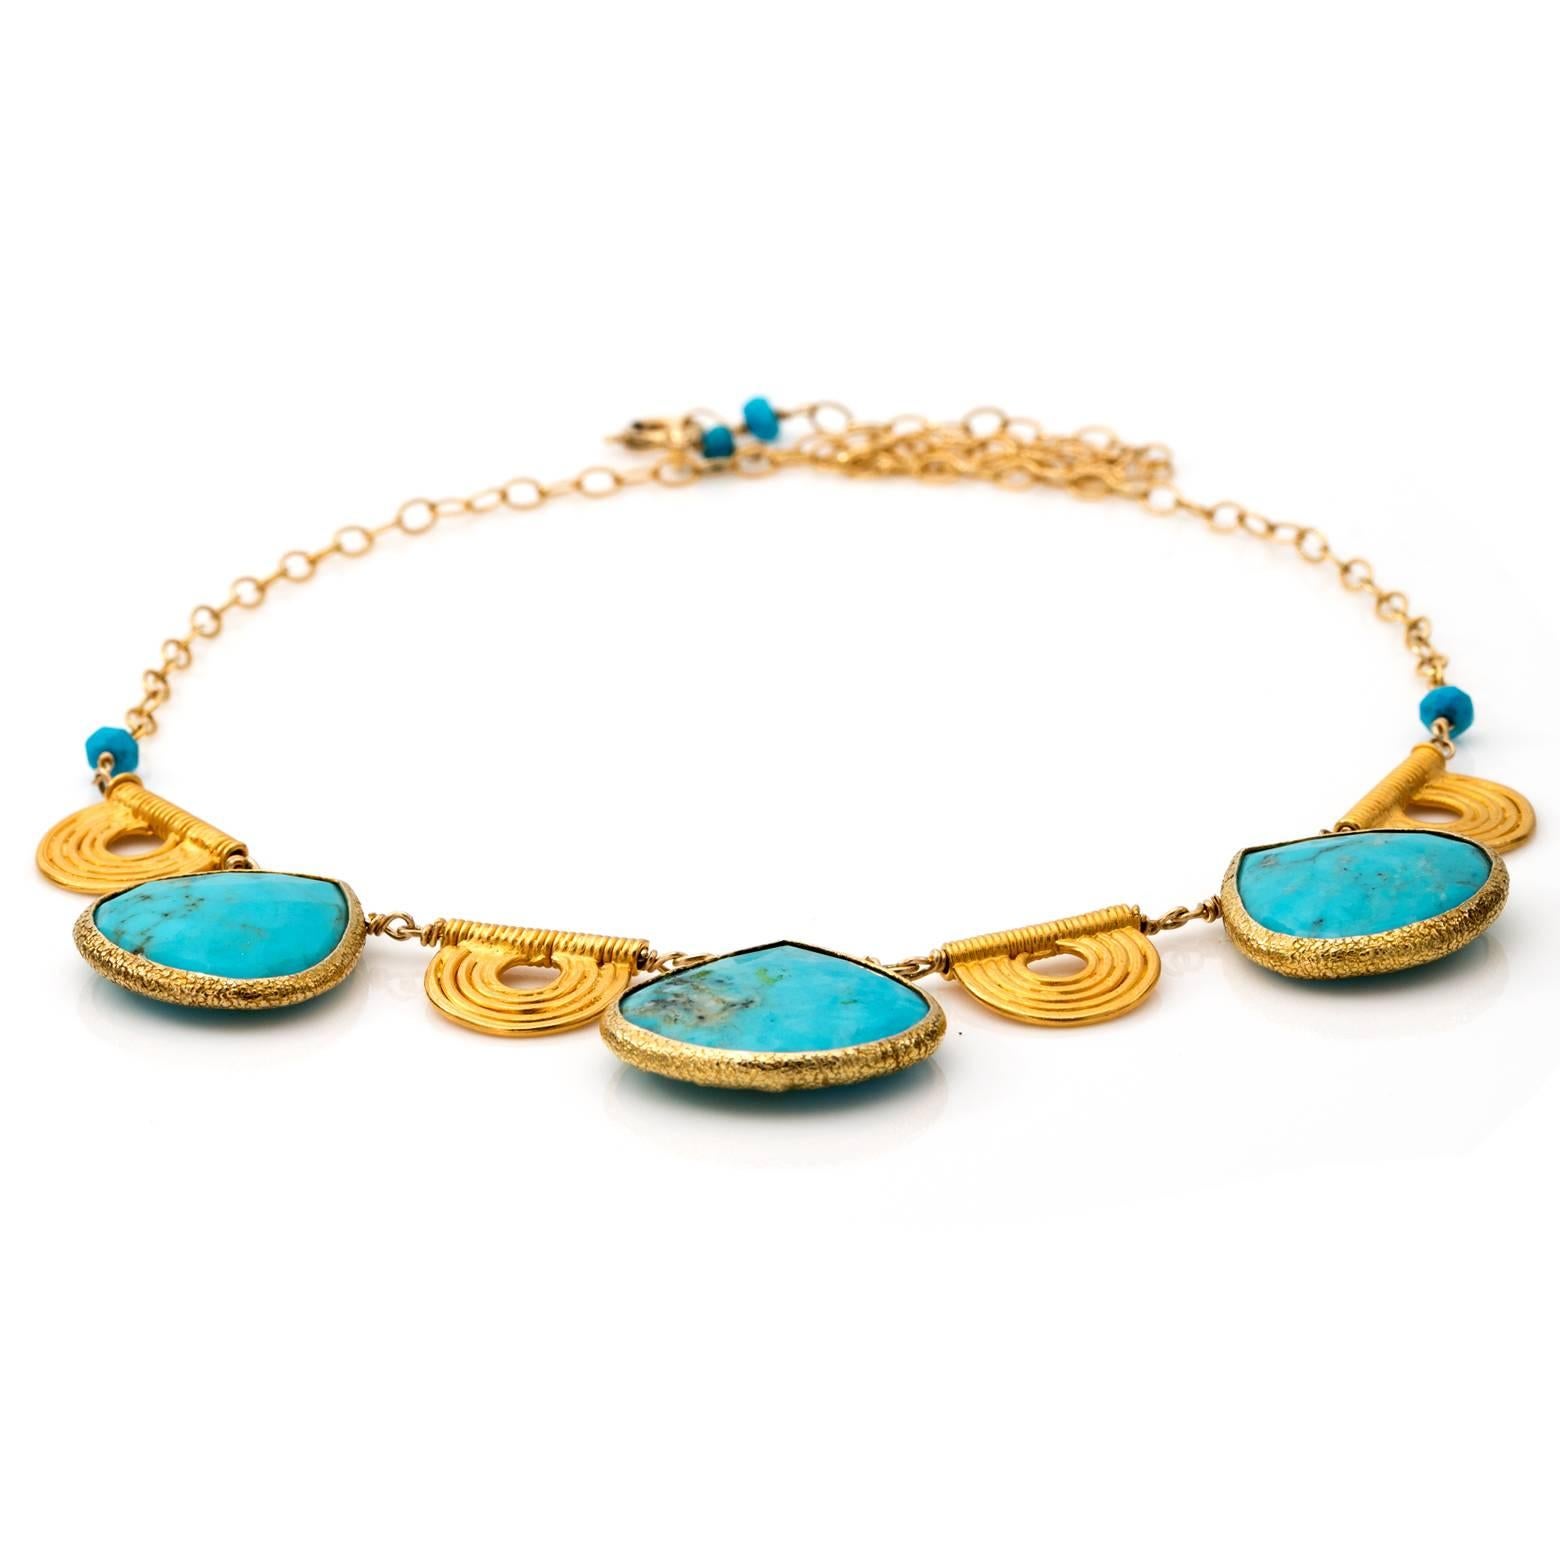 Women's or Men's Gold and Turquoise Collar Necklace with Tribal Gold Accents